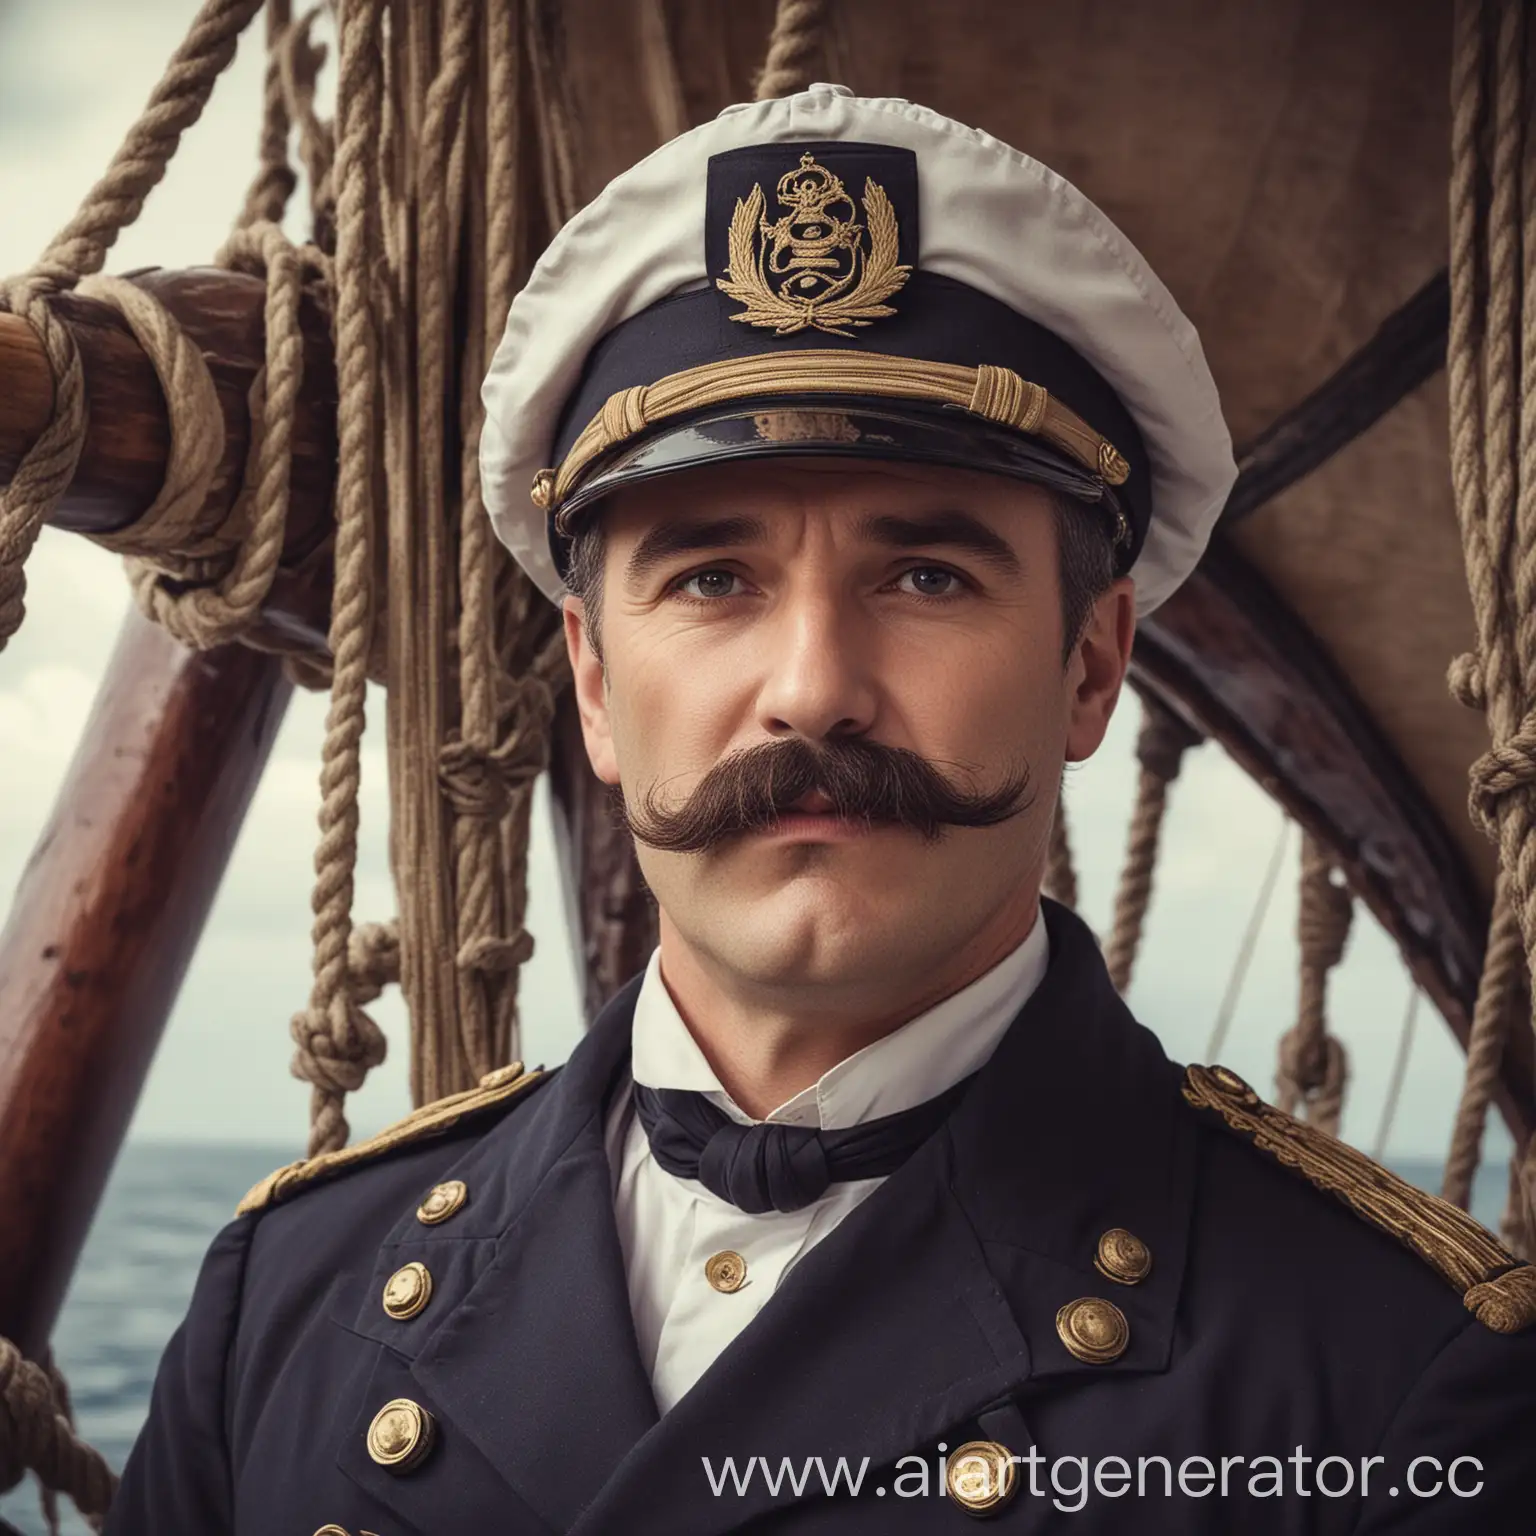 Captain-with-Mustaches-Steering-Sailing-Ship-on-Calm-Seas